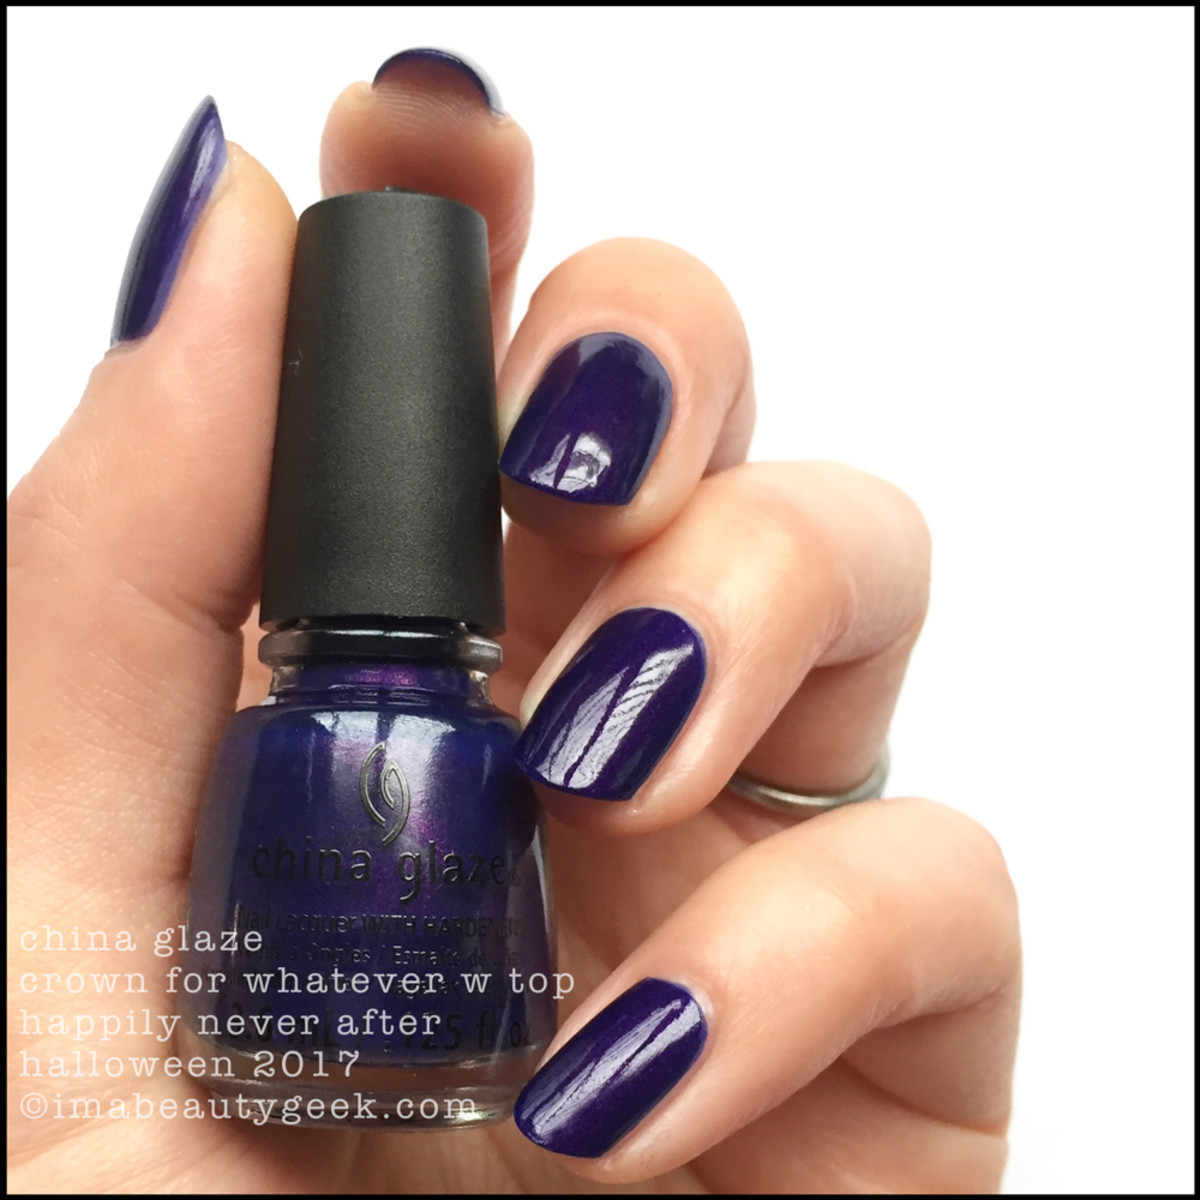 China Glaze Crown for Whatever 2 _ China Glaze Happily Never After Collection Halloween 2017